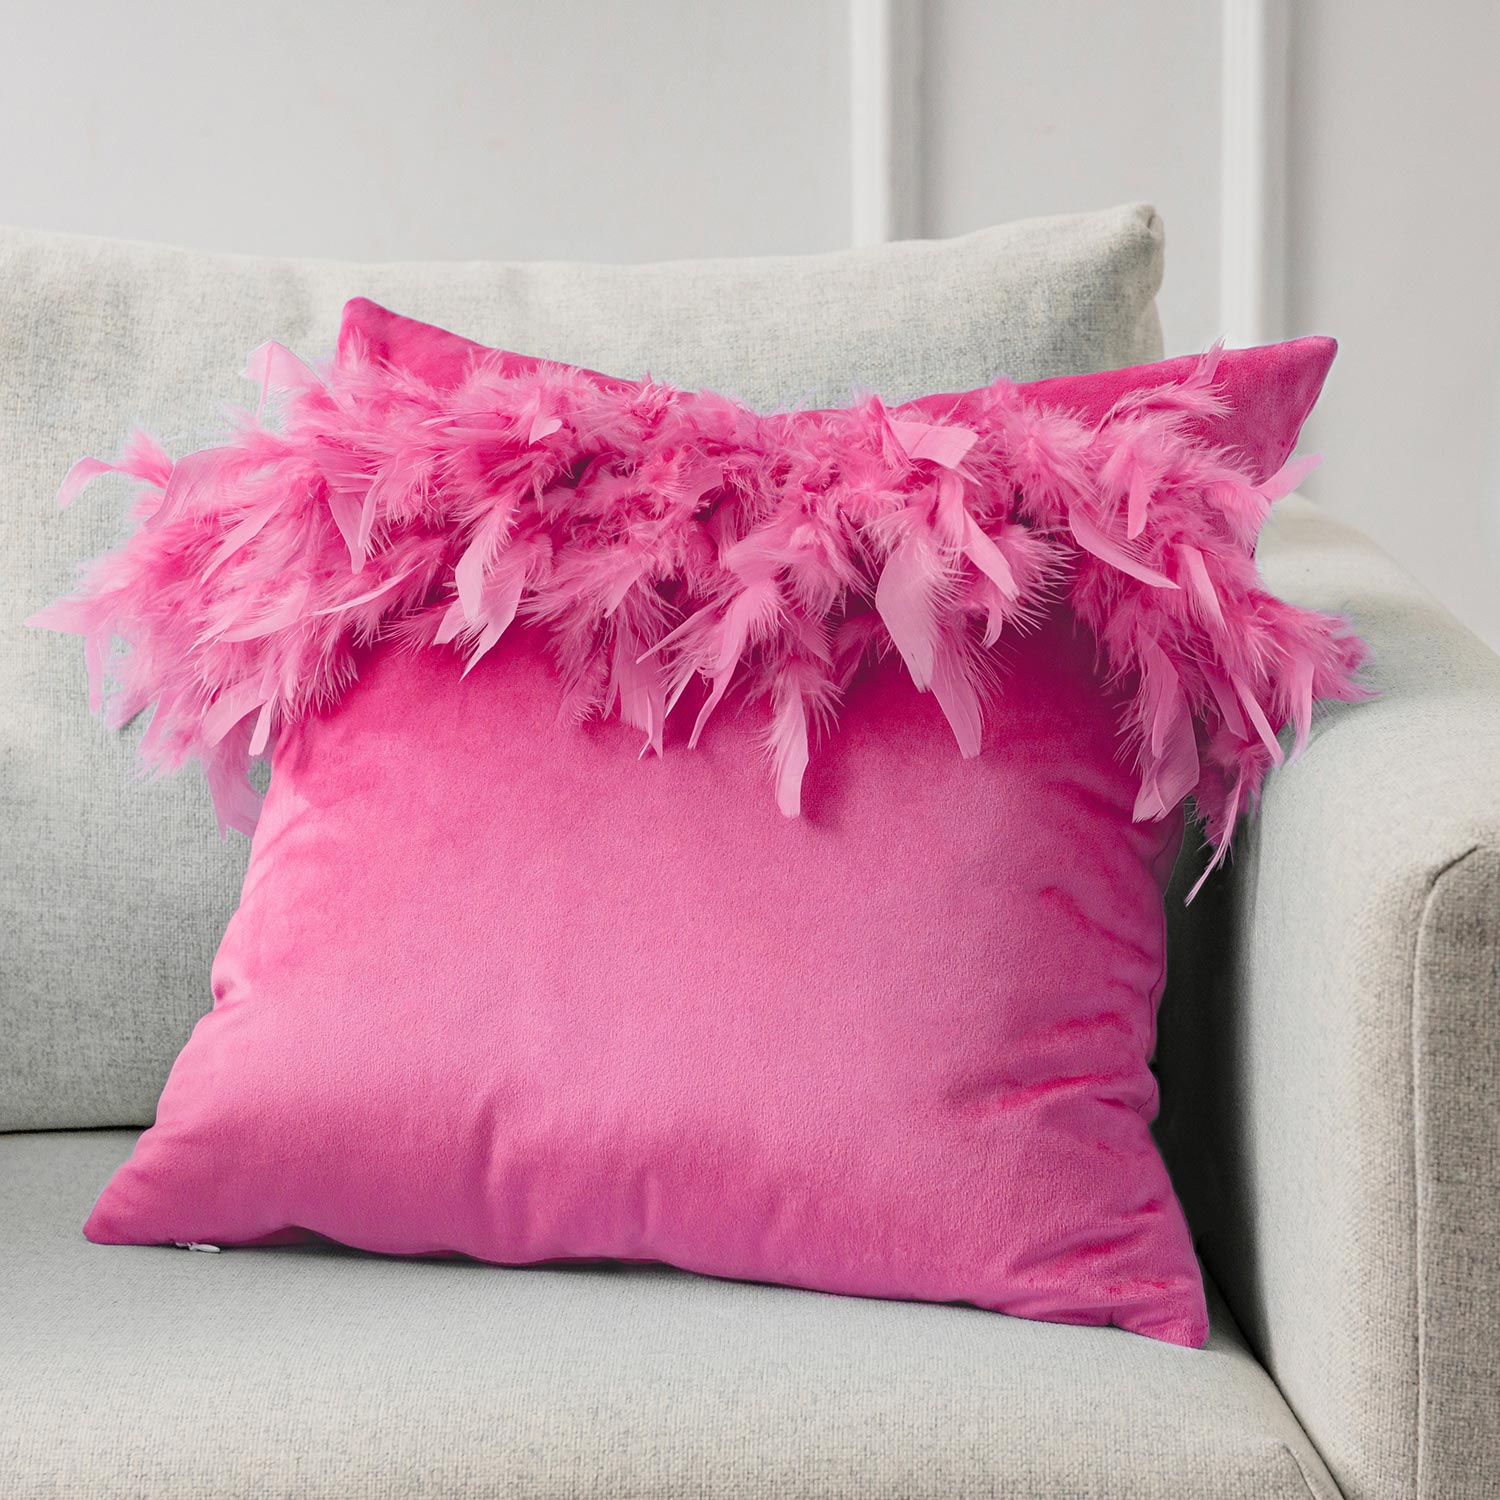 Phantoscope Plush Faux Fur Full Throw Pillow with Insert, 12x20, Pink, 1  Pack 